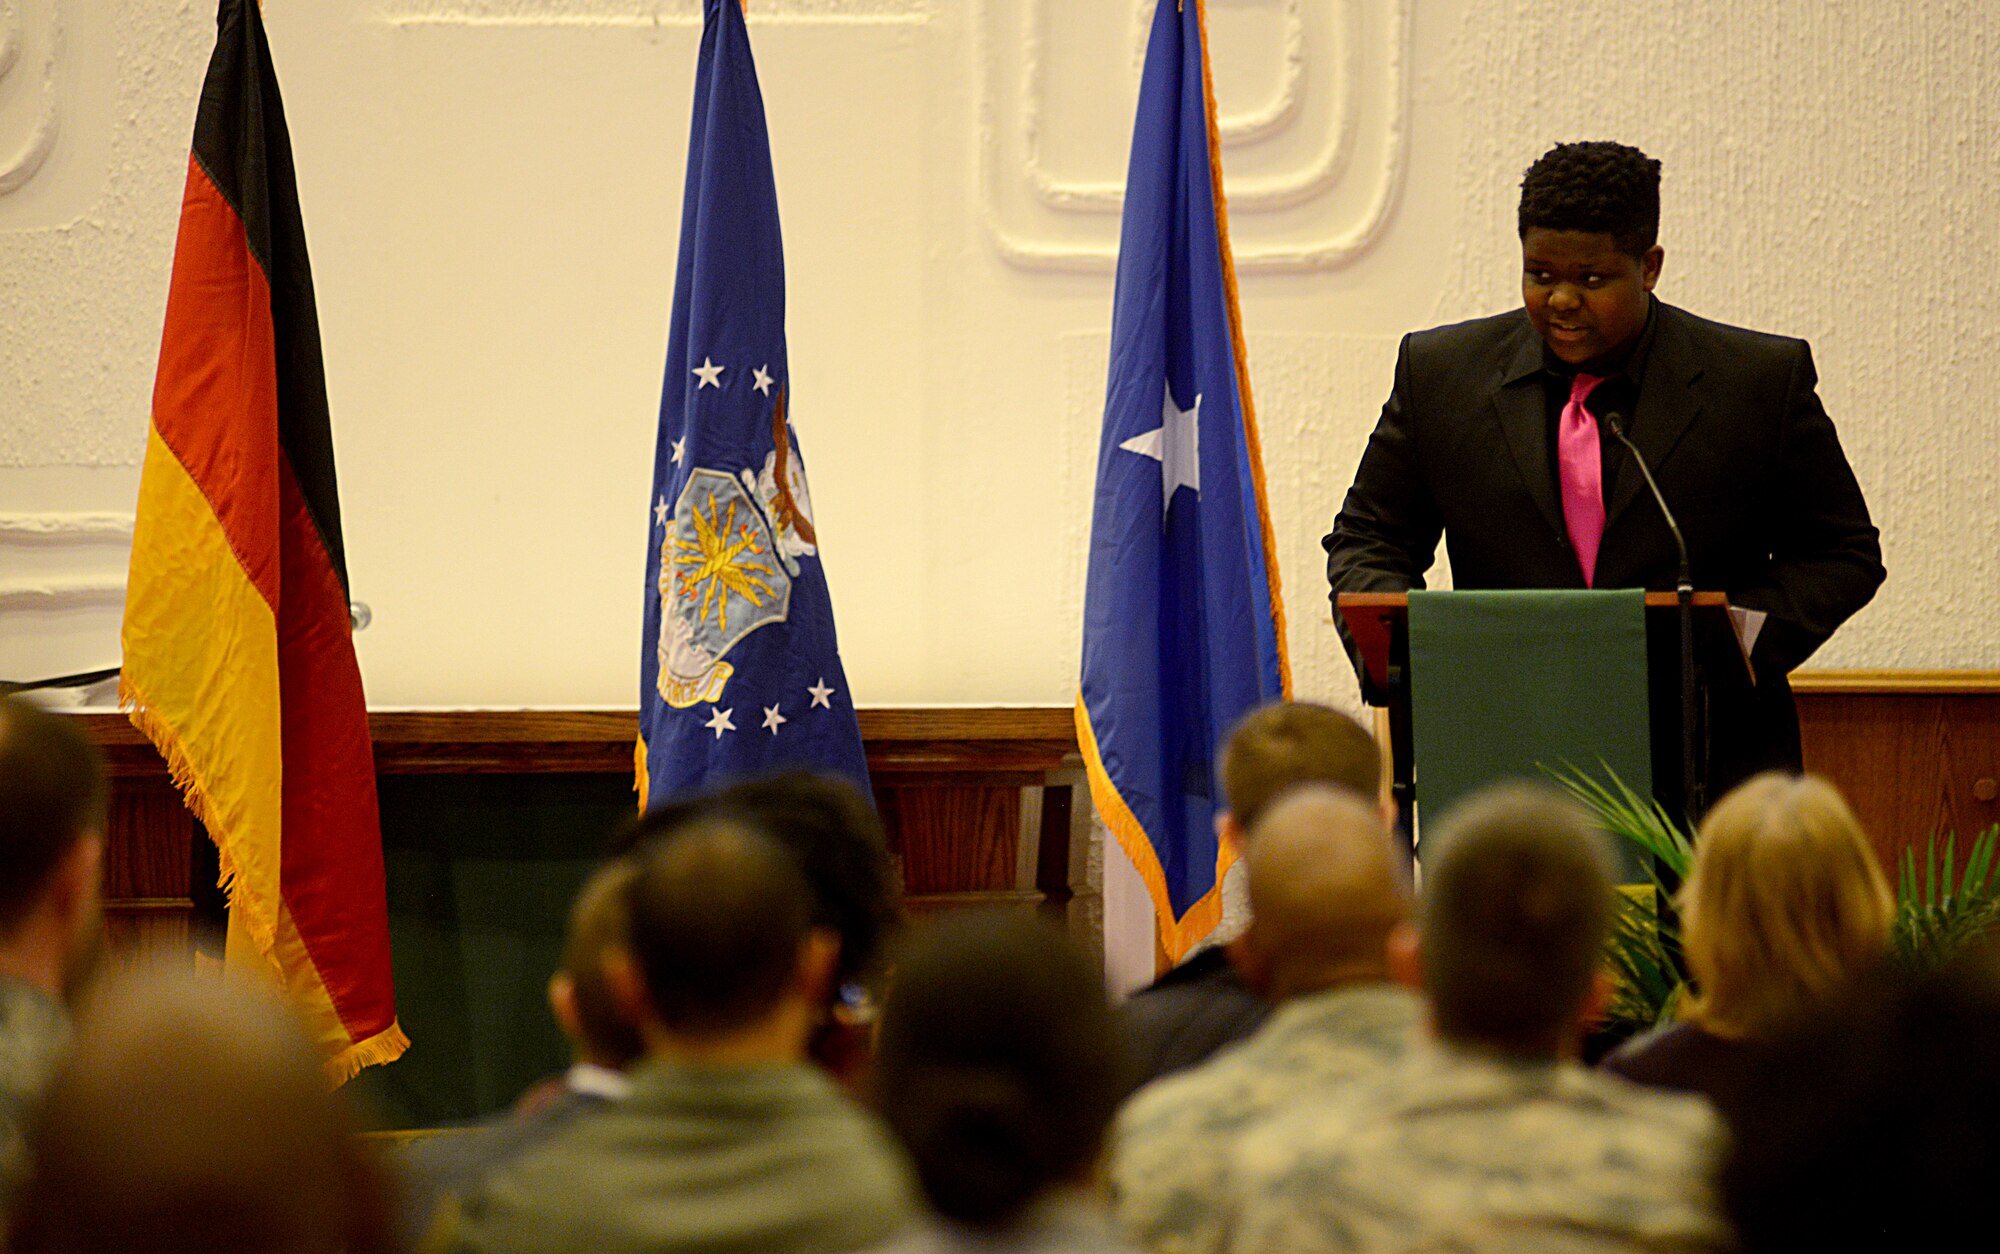 Solomon Udo-Aka, a Ramstein High School freshman, presents his first-place winning oratorical speech during a Martin Luther King Jr. observance ceremony Jan. 12, 2016, at Ramstein Air Base, Germany. Udo-Aka’s speech focused on King’s life and work as an inspiration and servant to others. (U.S. Air Force photo/Staff Sgt. Timothy Moore)